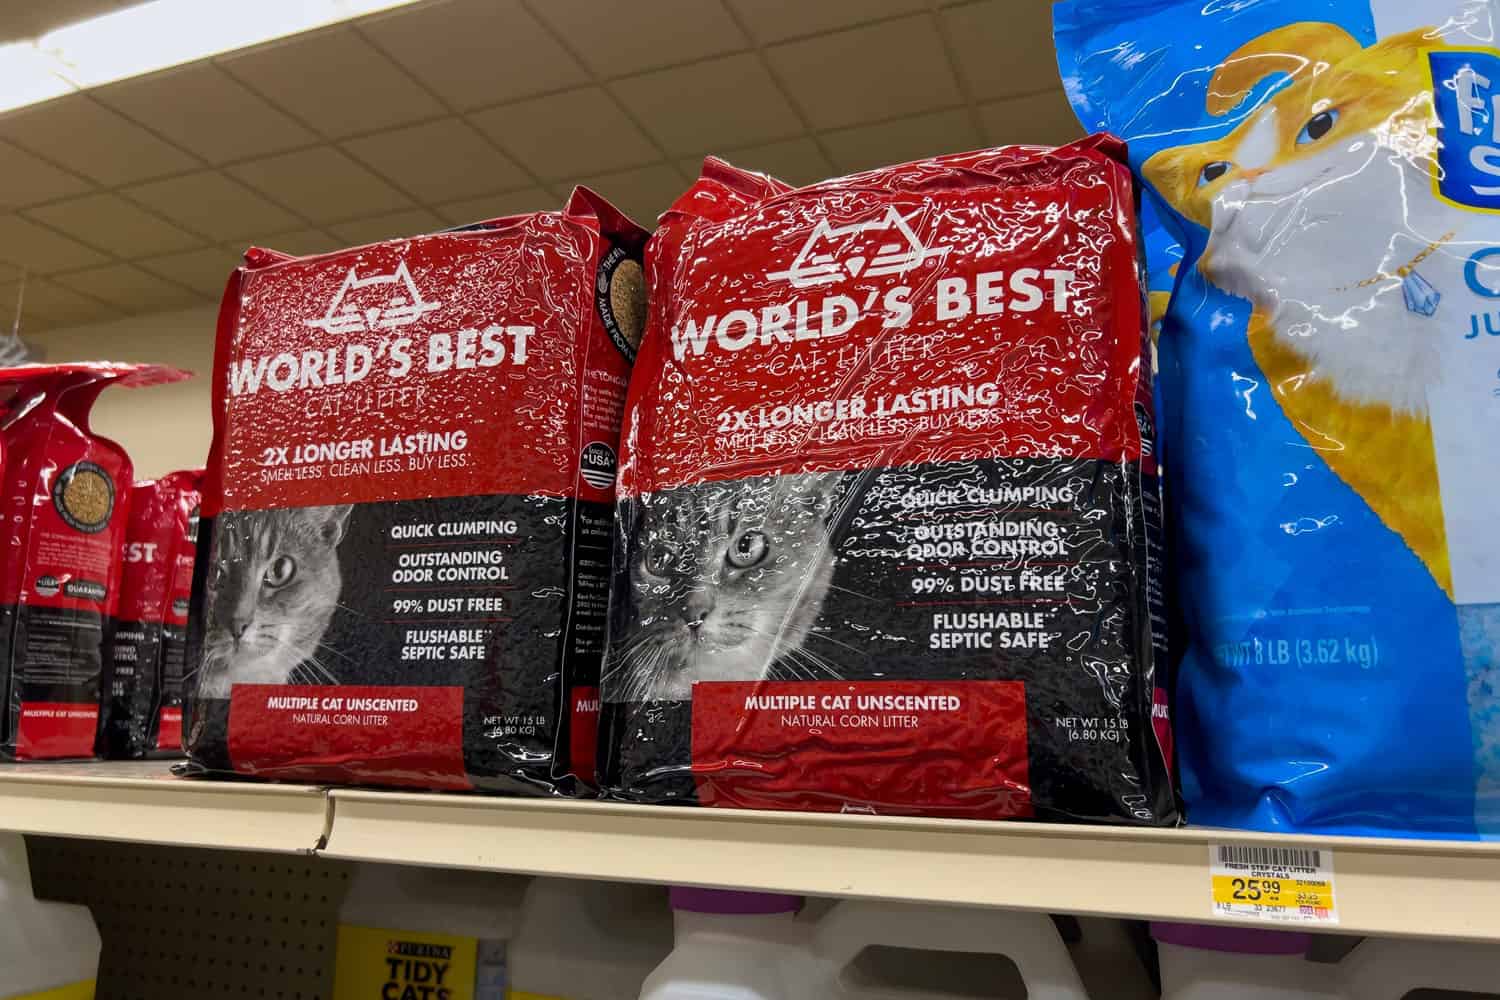 Close up view of Worlds Best cat litter for sale inside a grocery store. 2